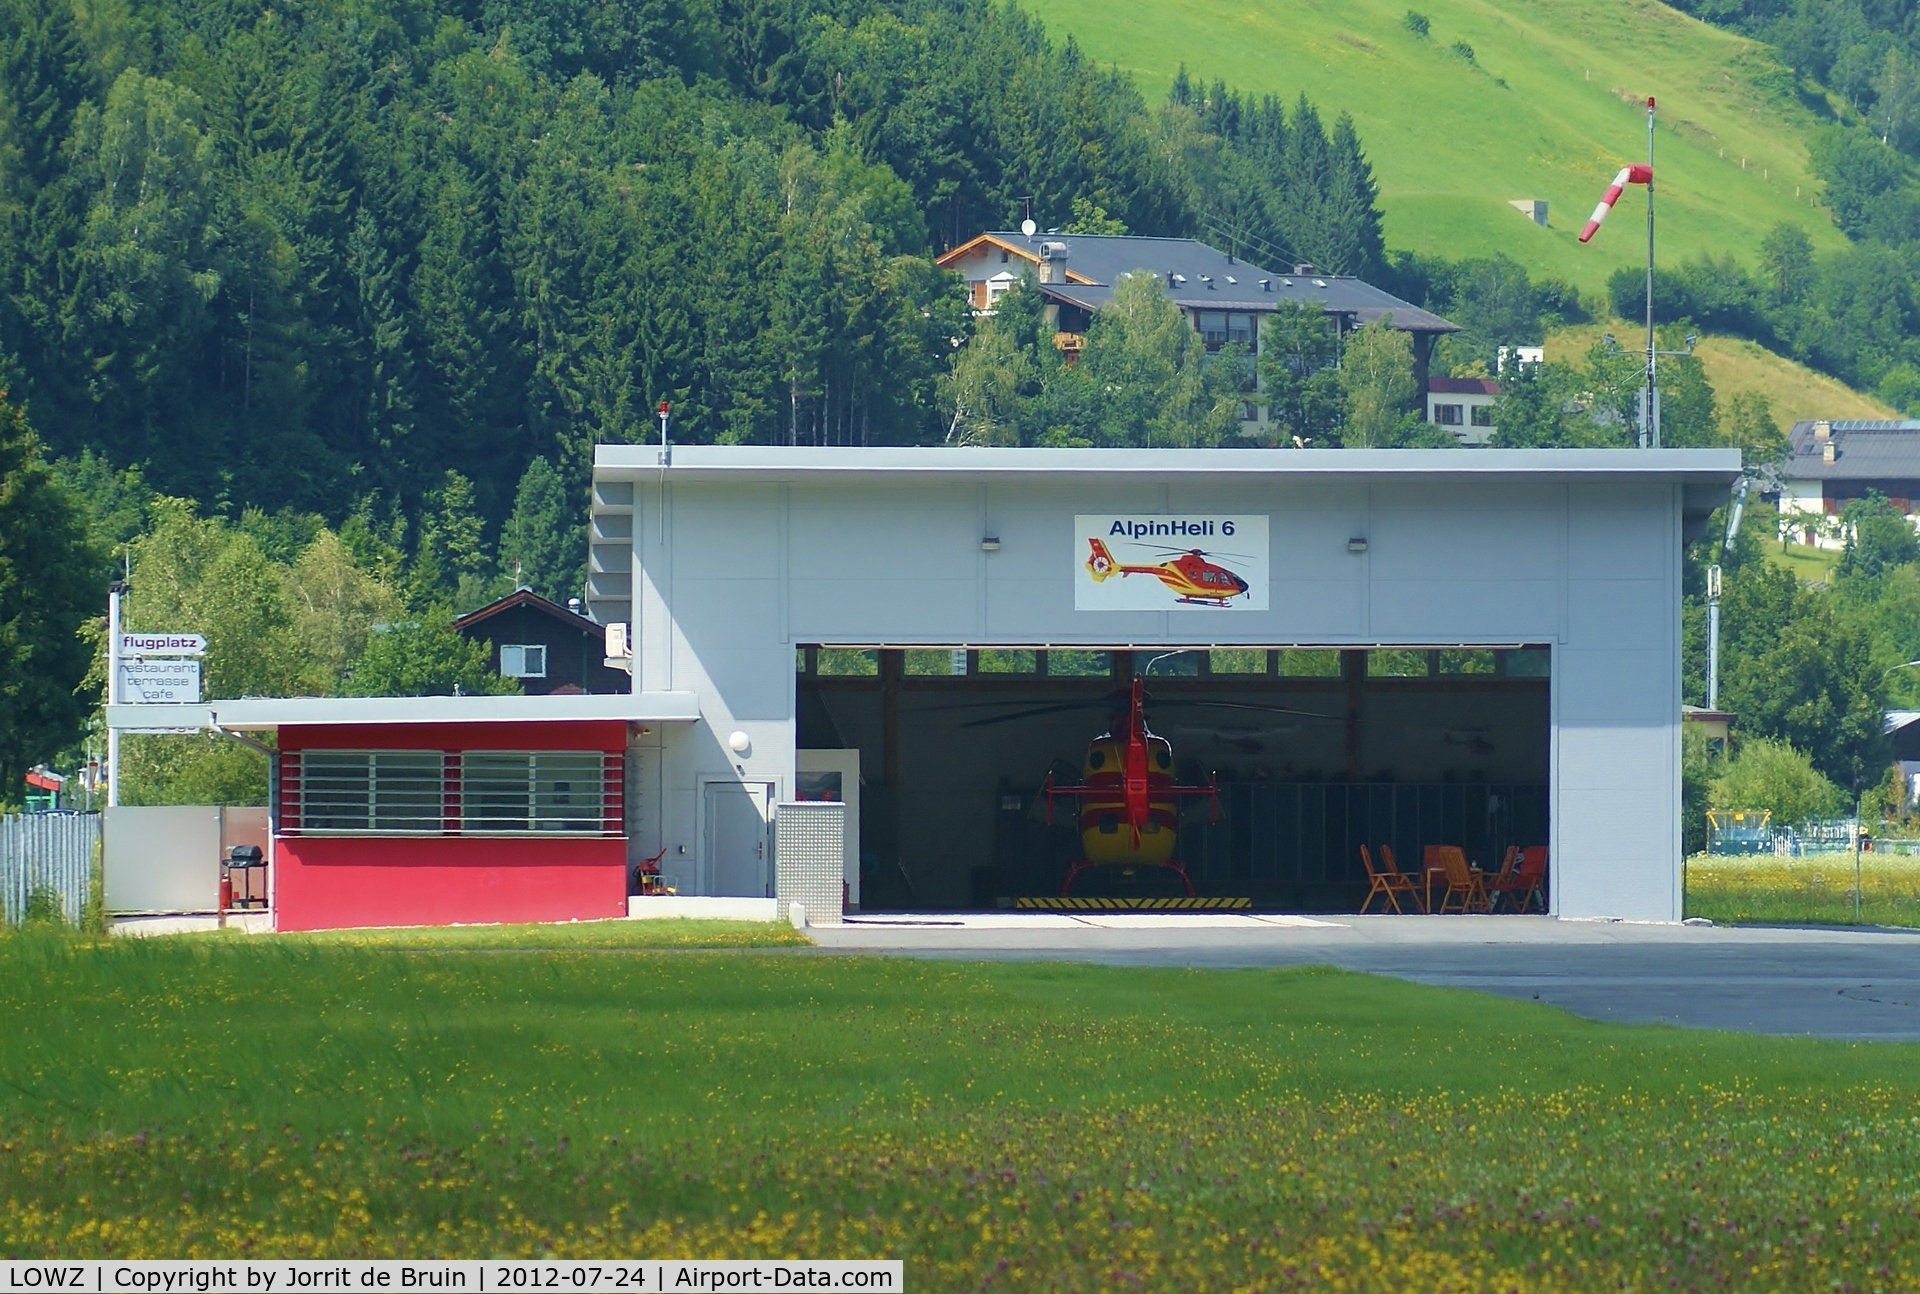 LOWZ Airport - The homebase of the AlpinHeli 6. It is ready to be pulled out of the hangar where the pilots are waiting in the lounge to fly. 